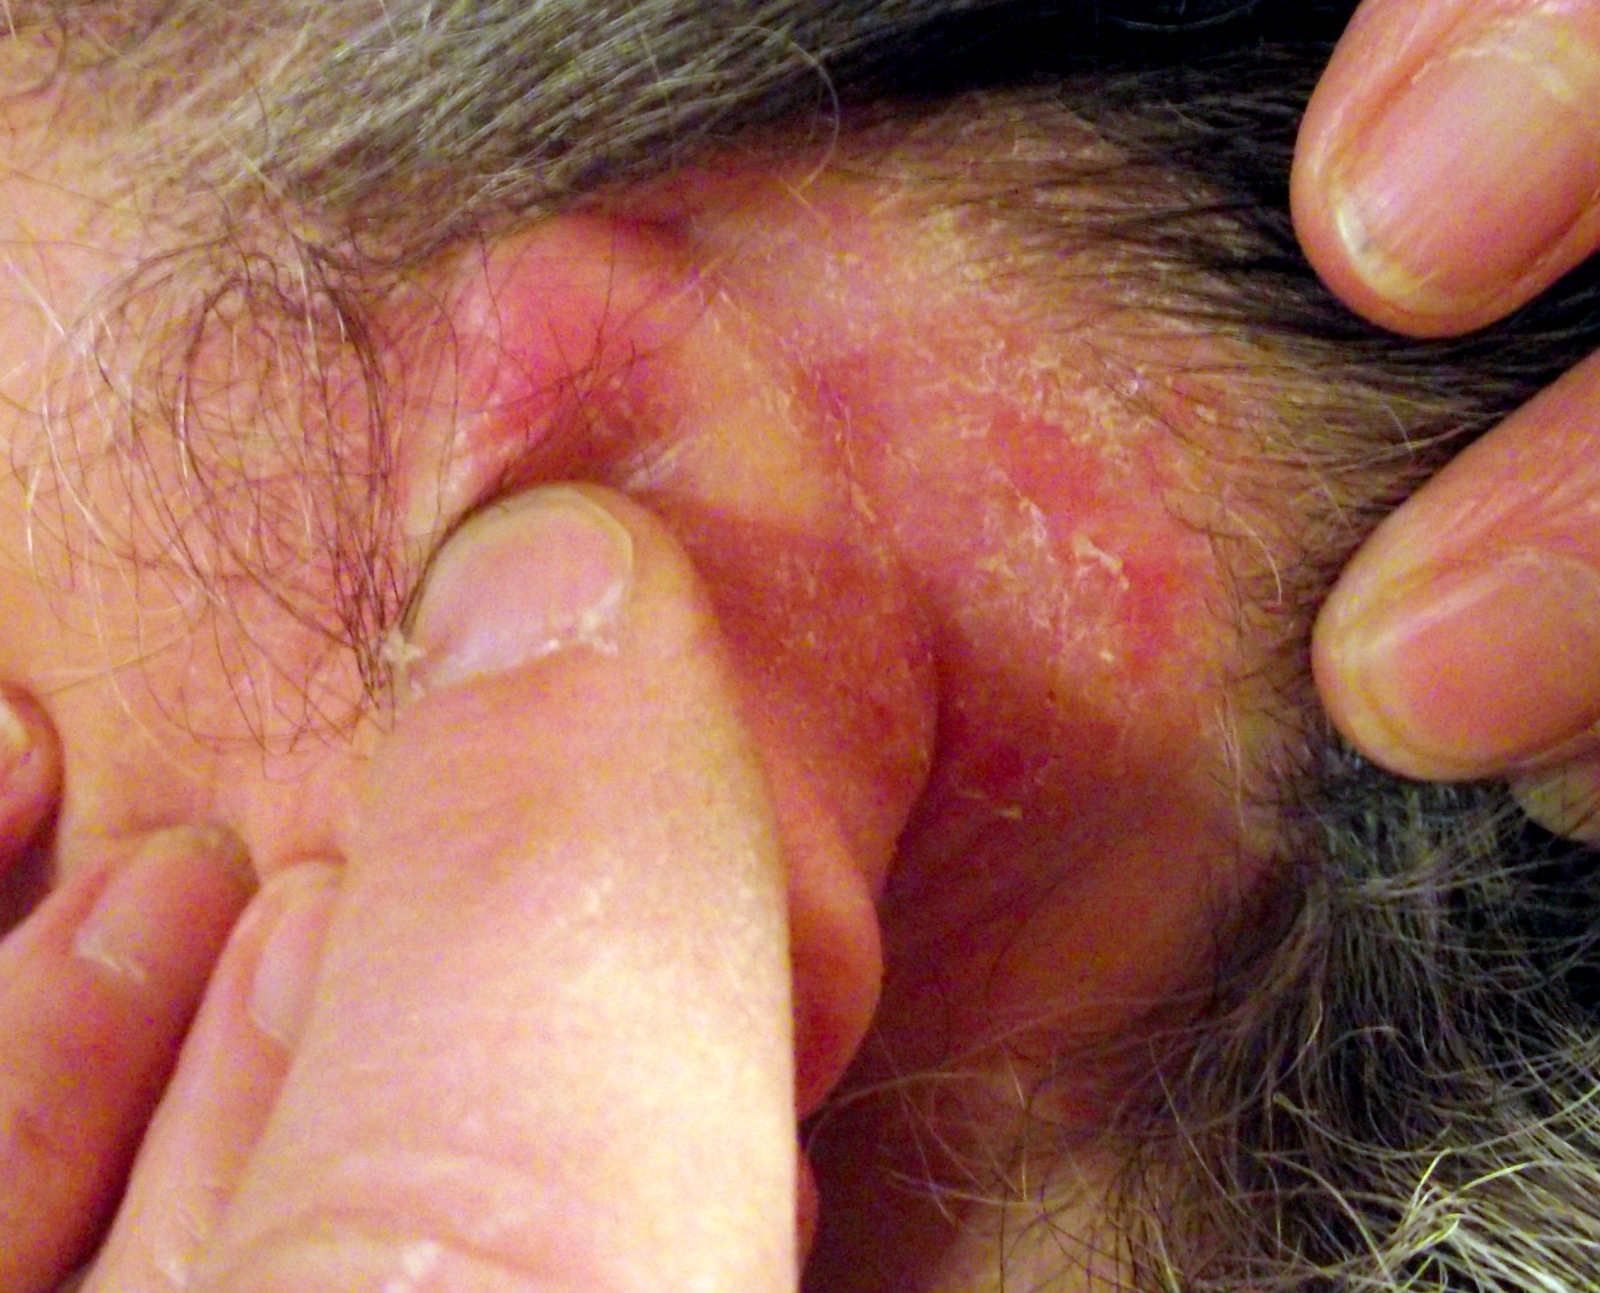 Itchy Ears- Seborrheic dermatitis is a common cause